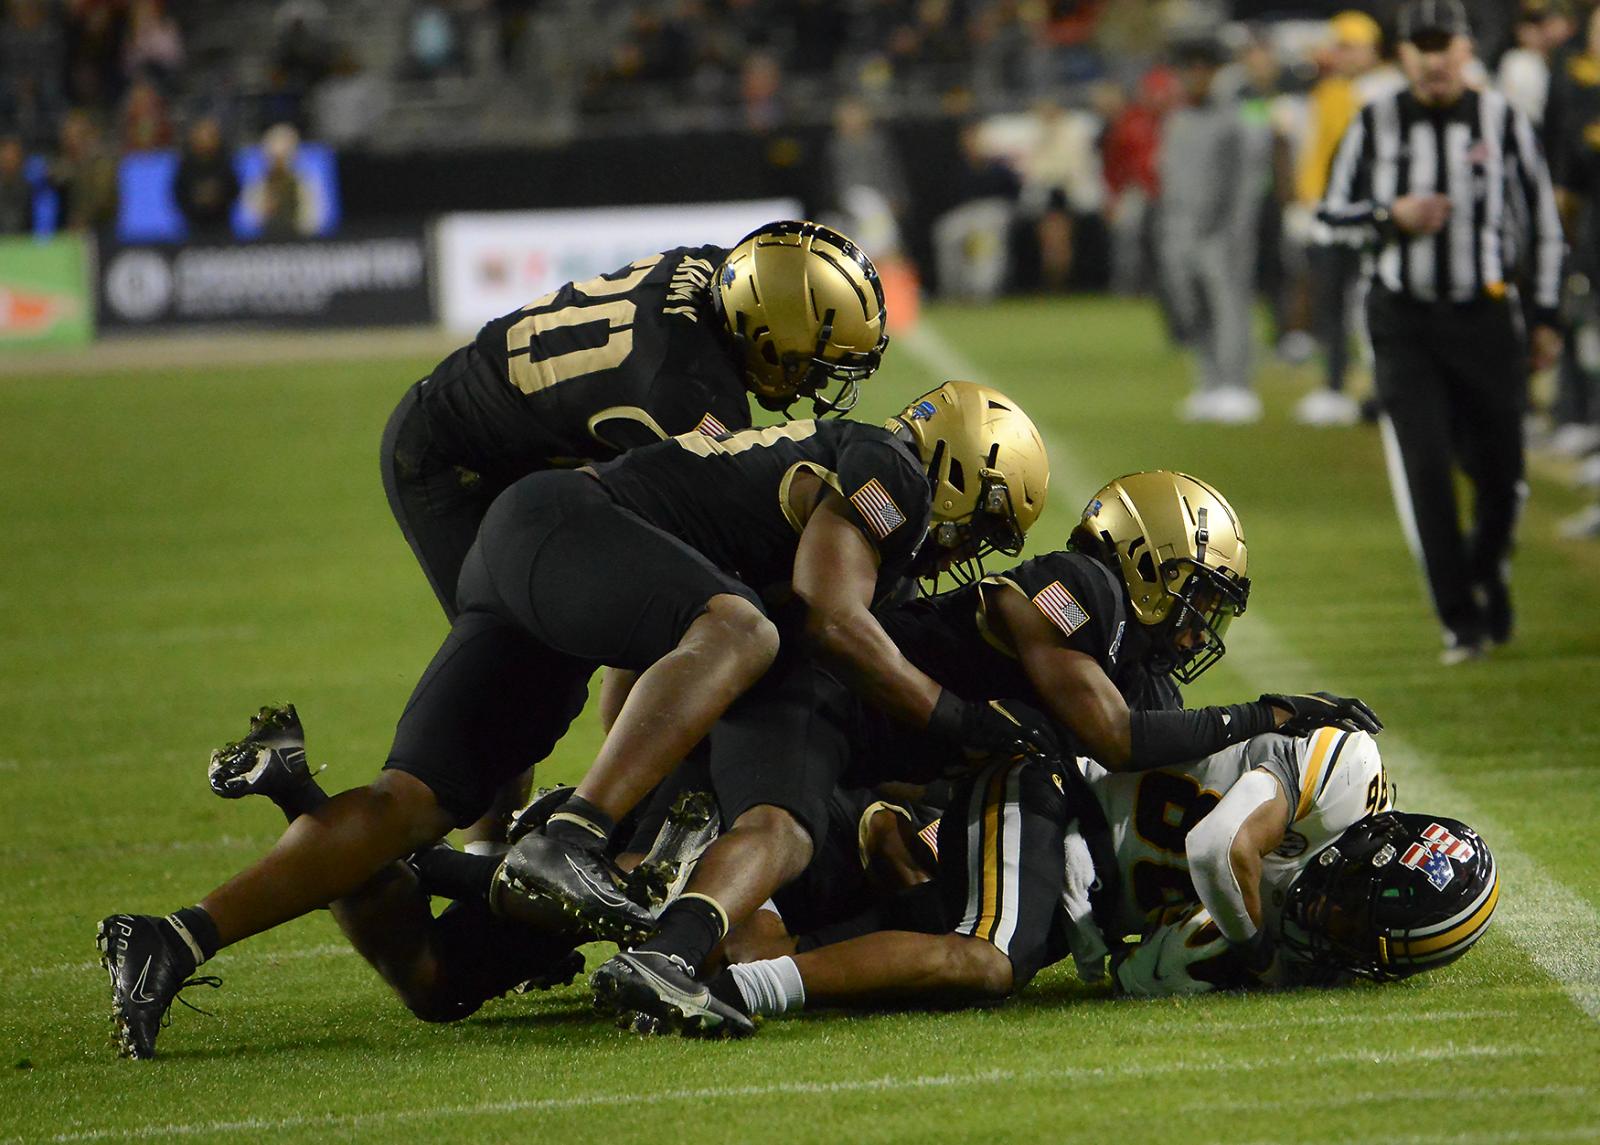 Tauskie Dove gets tackled by army players during the Armed Forces Bowl on Wednesday at Amon G. Carter Stadium in Fort Worth, Texas.